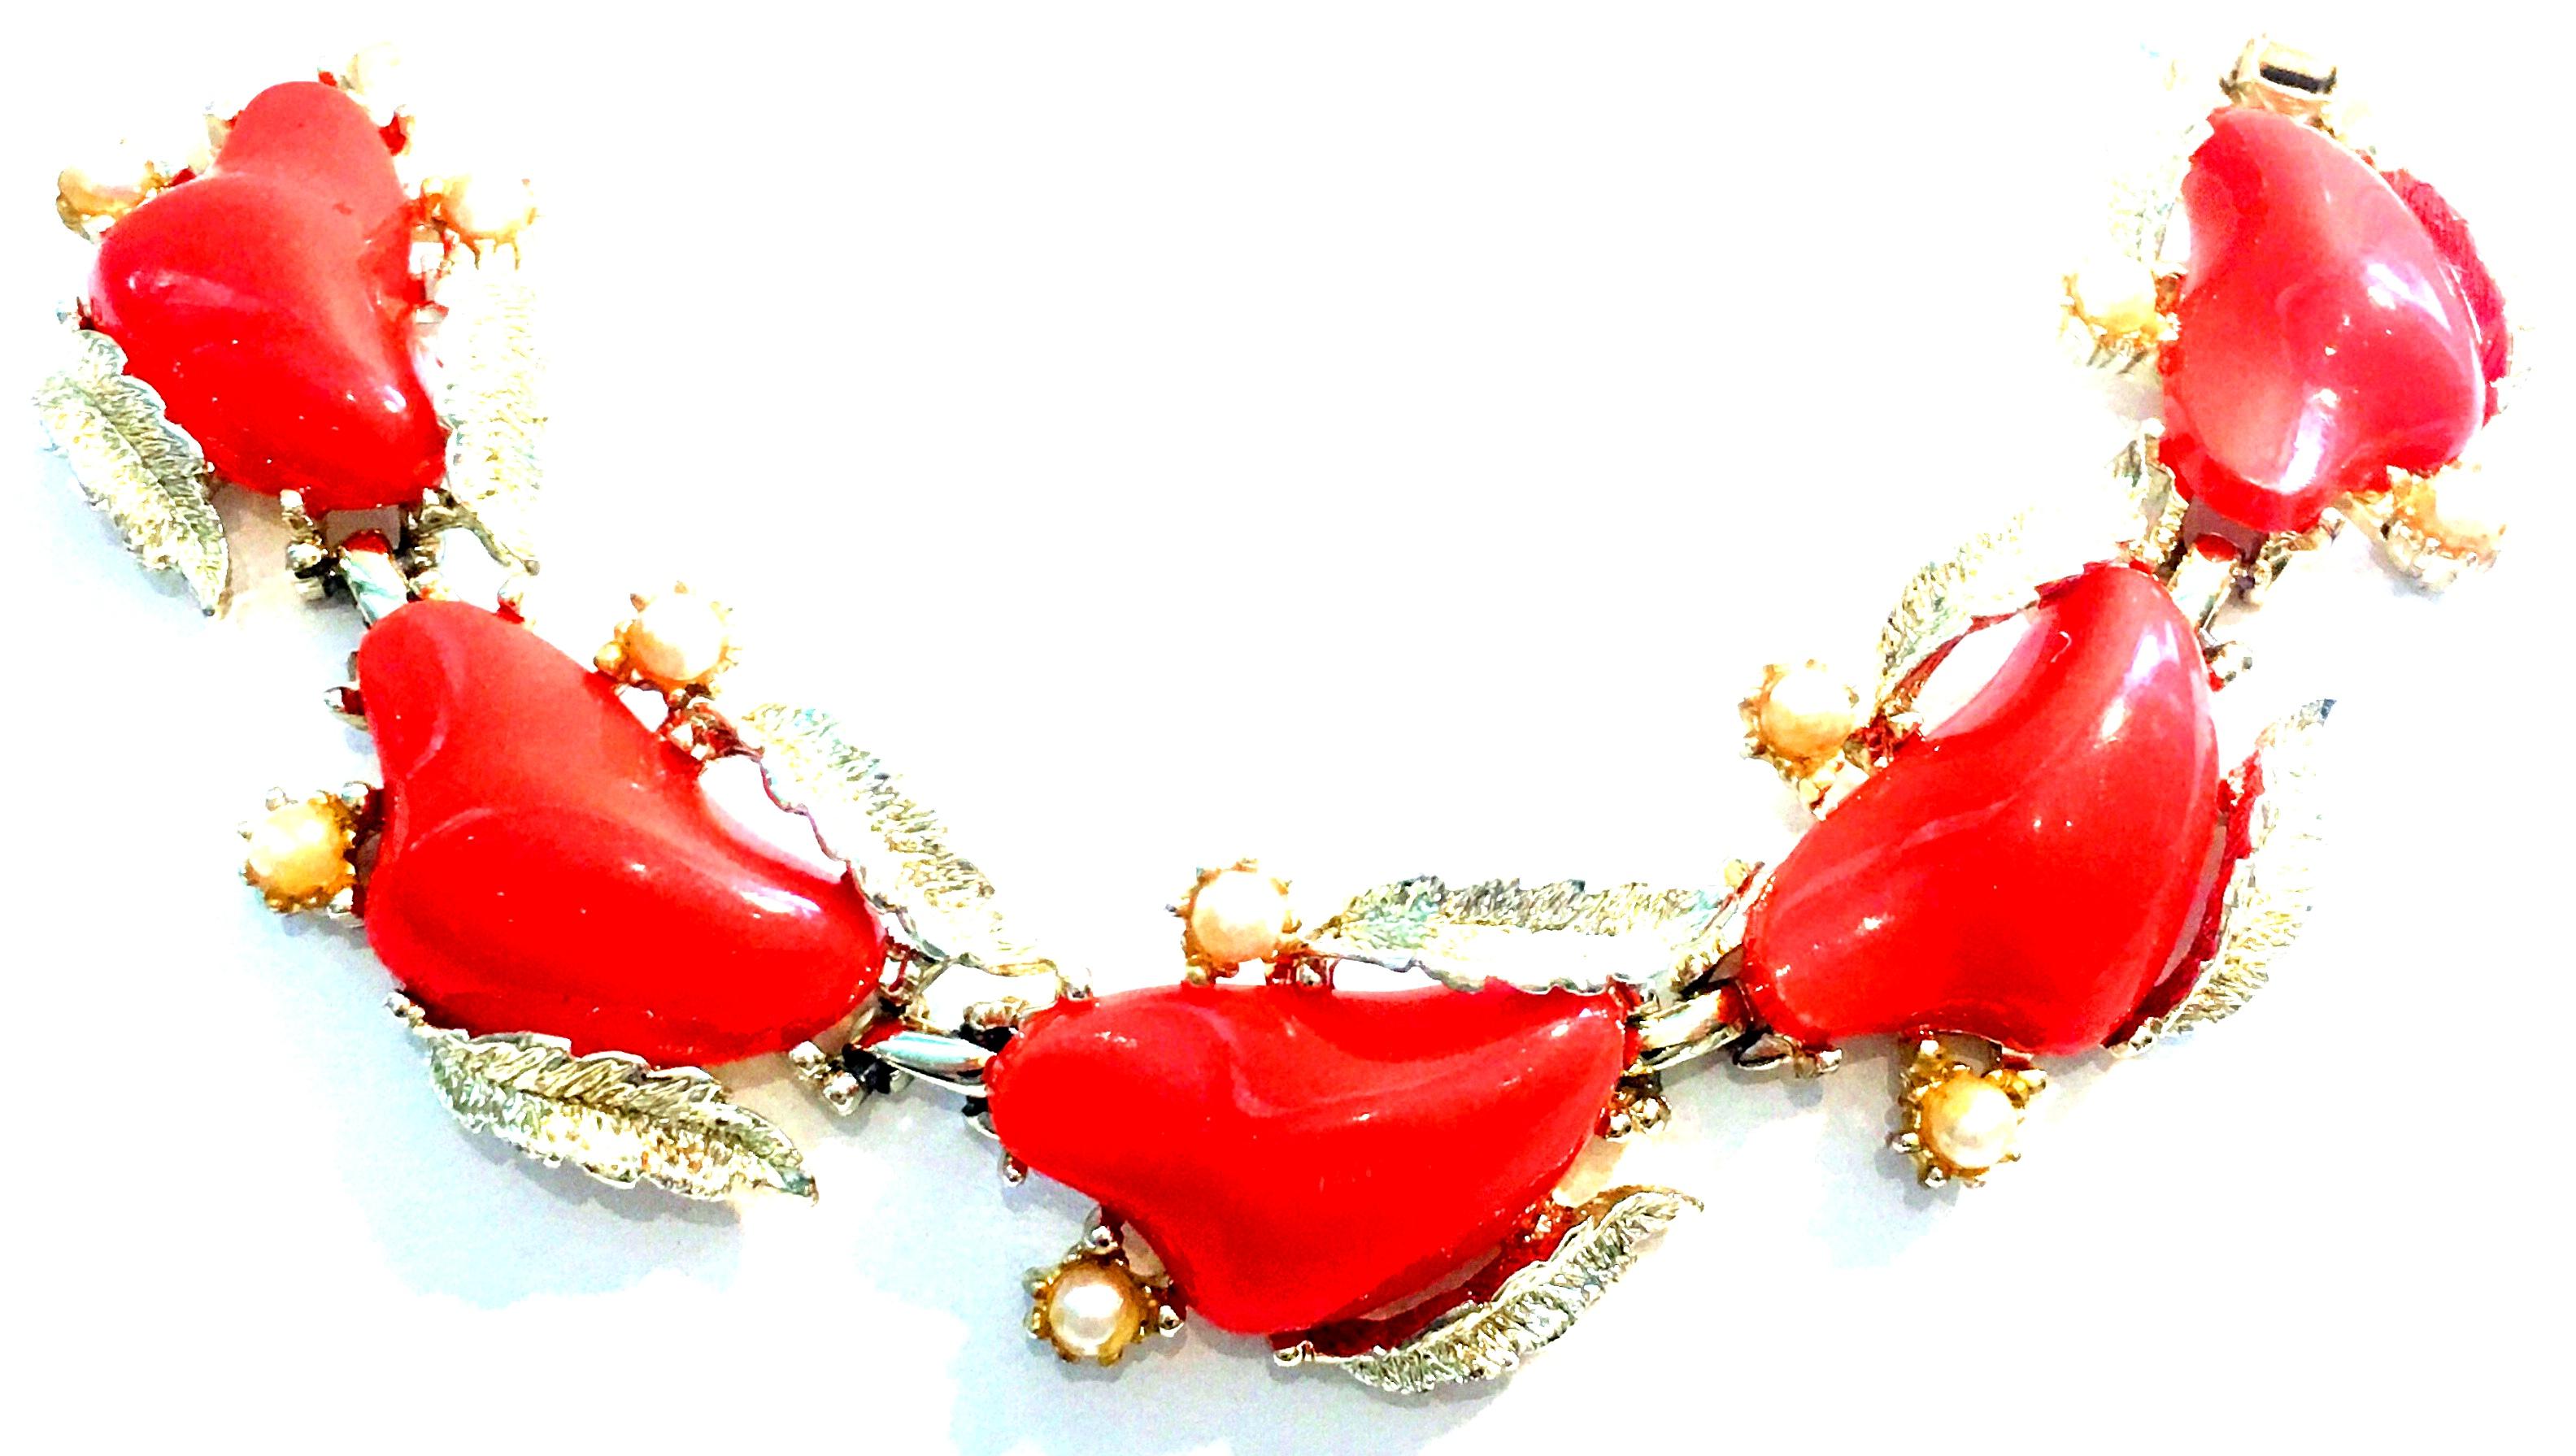 Mid-20th Century Gold Plate, Faux Coral Lucite & Faux Pearl five link Bracelet & Pair Of Earrings By, Coro Set Of Three.
This three piece demi parure 5 link bracelet and pair of earrings by Coro features, gold plate base metal with vivid orange